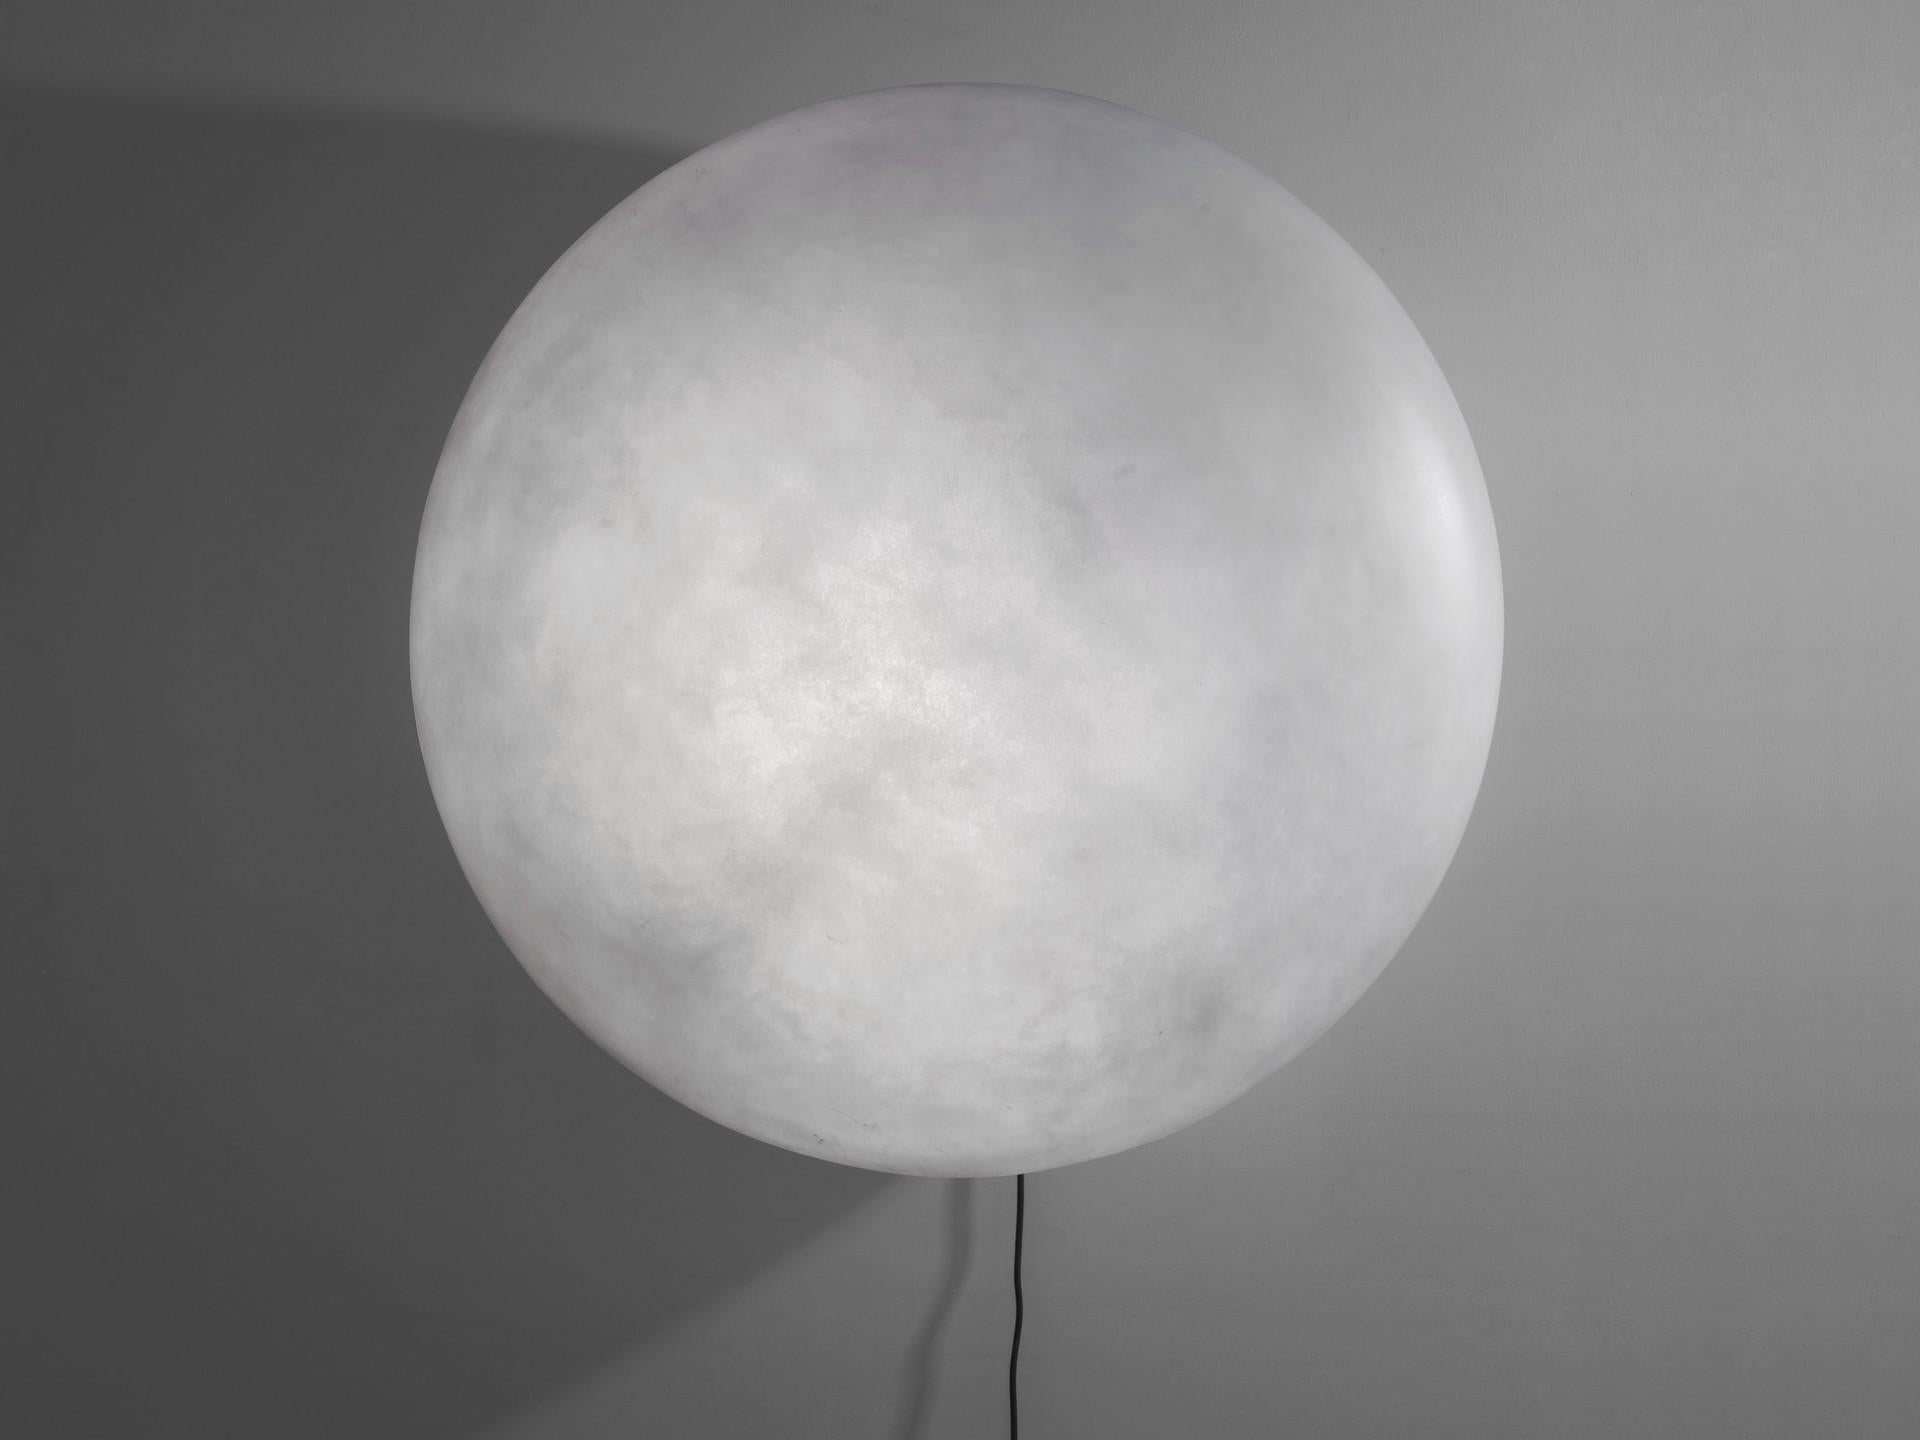 Etty lamp by Imperfettolab
2015
Designer : Verter Turroni
Dimensions: Ø 50 X 15 cm
Materials: fibreglass
Available in other sizes.

A lamp that, like a moon high in the sky or reflected in the water, is capable of creating a warm light point,